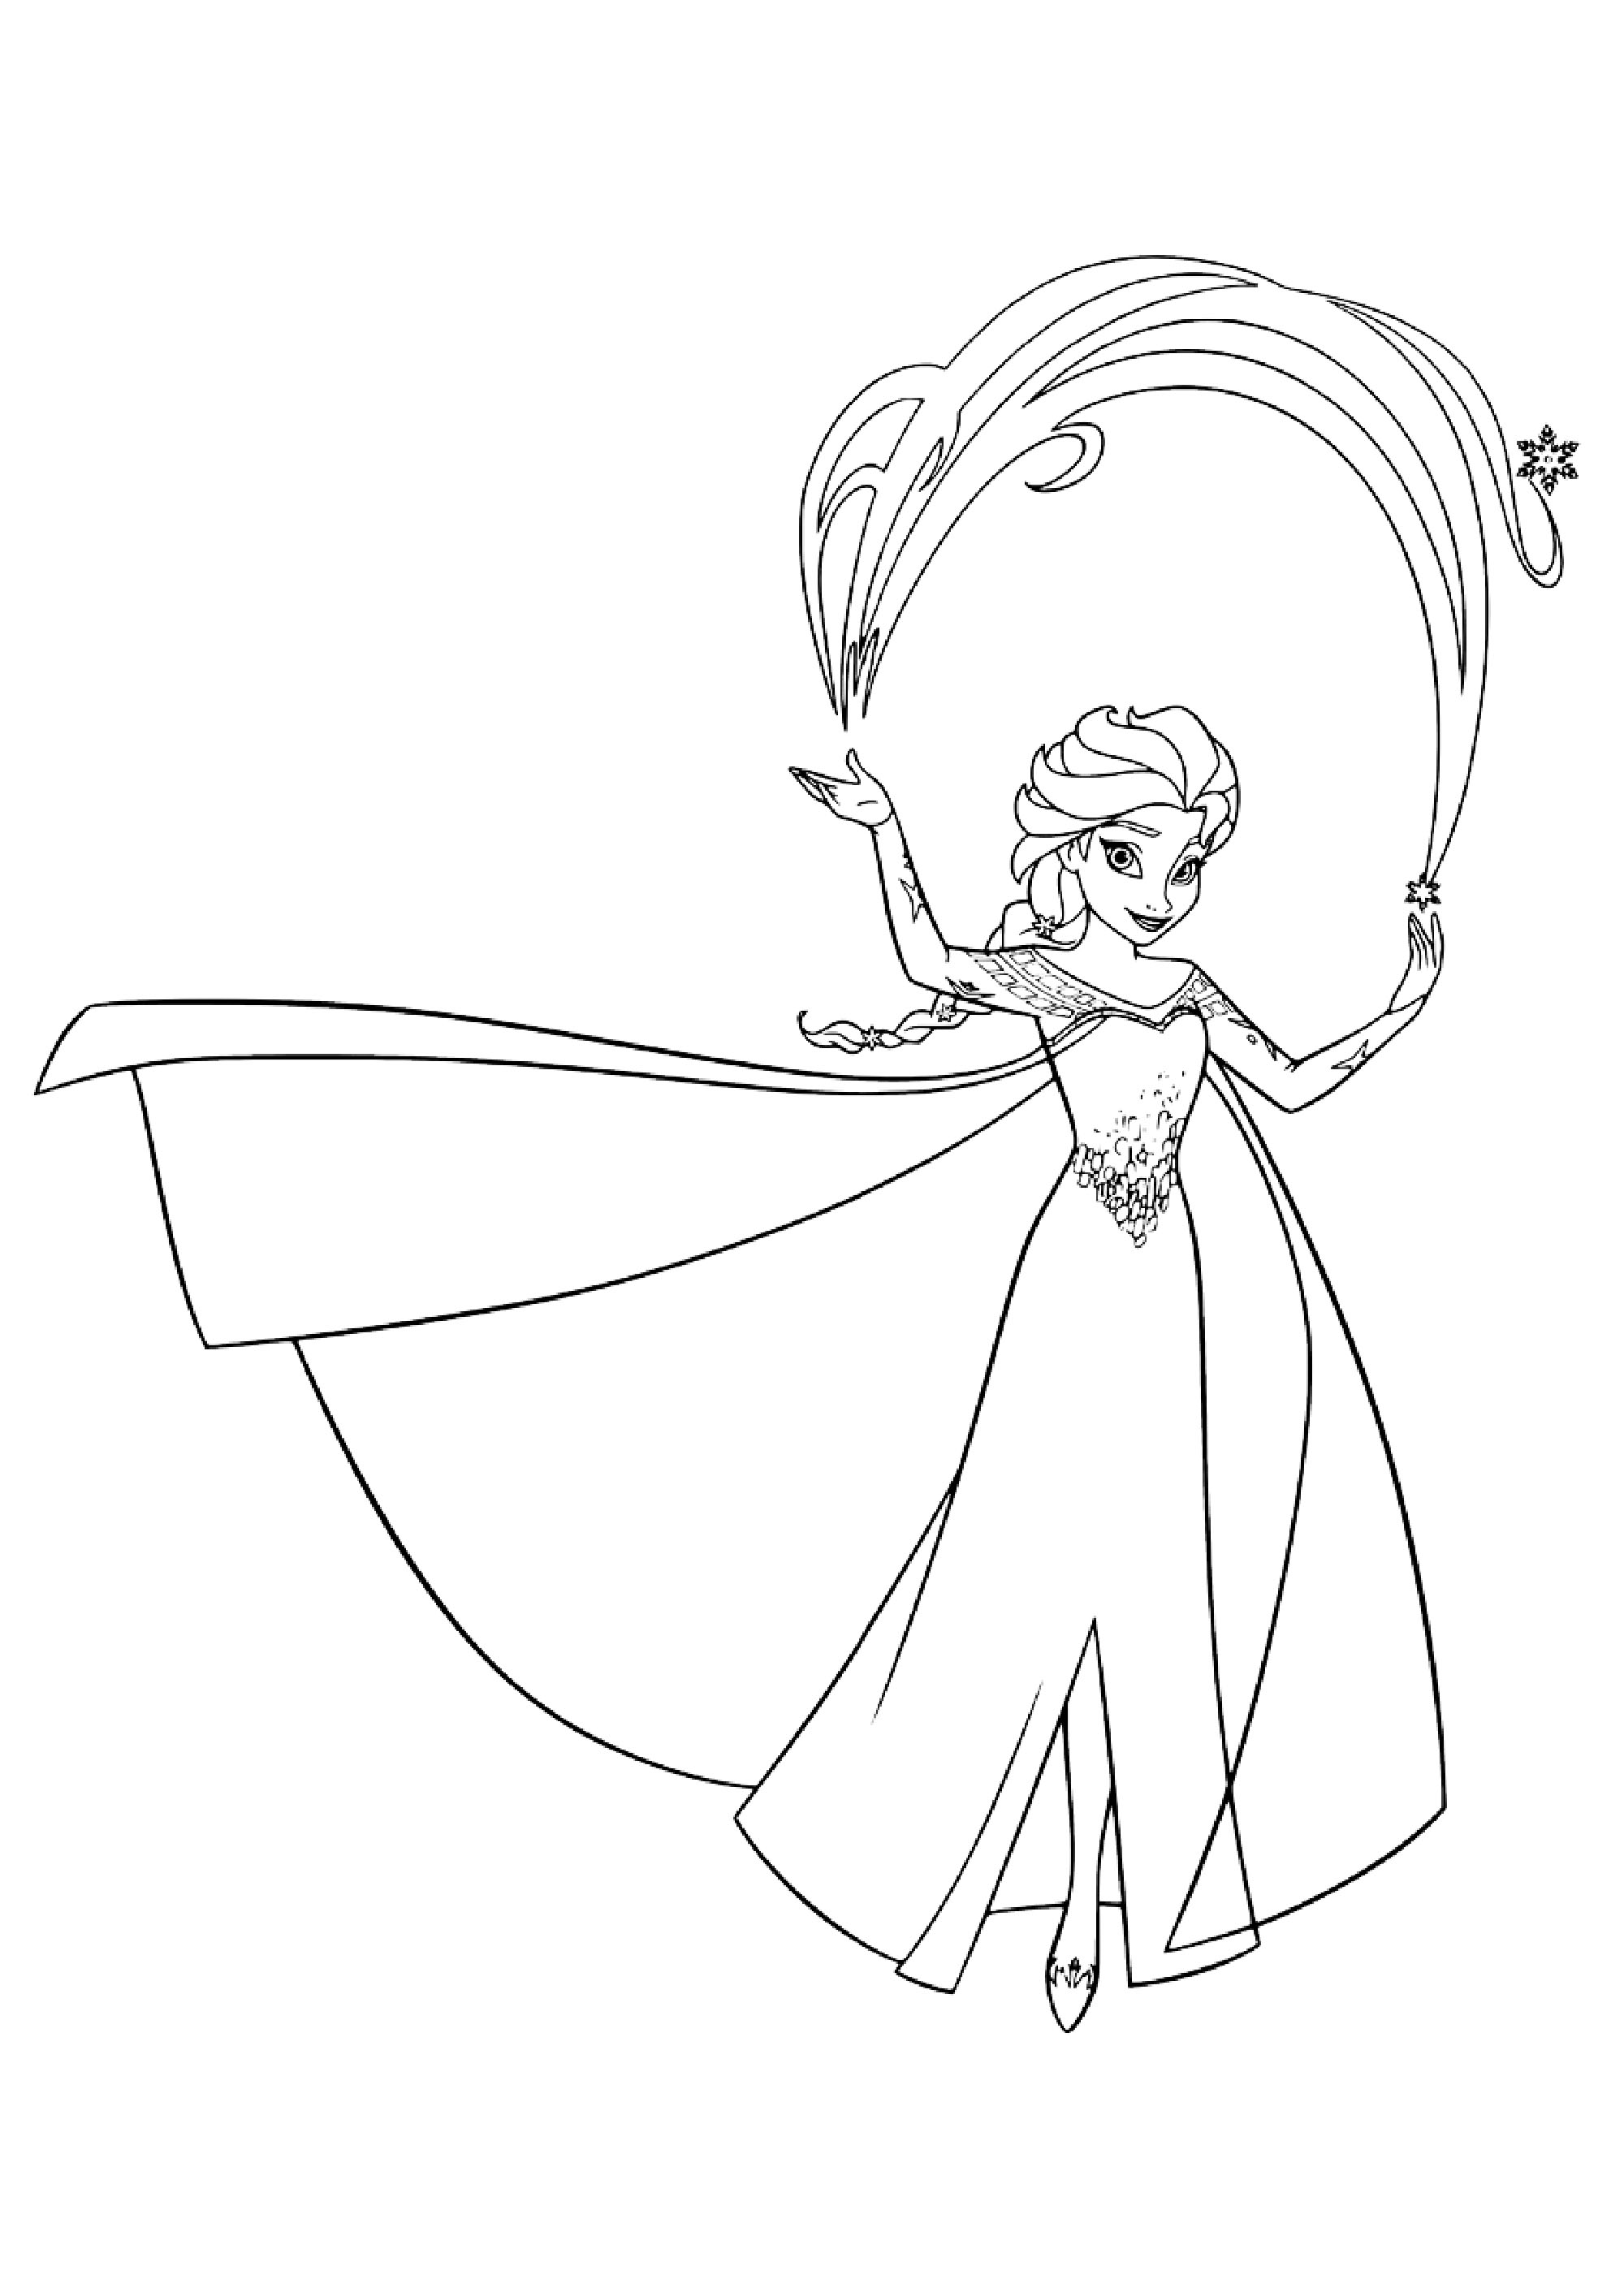 Funny Frozen 2 Coloring Pages - Coloring and Drawing